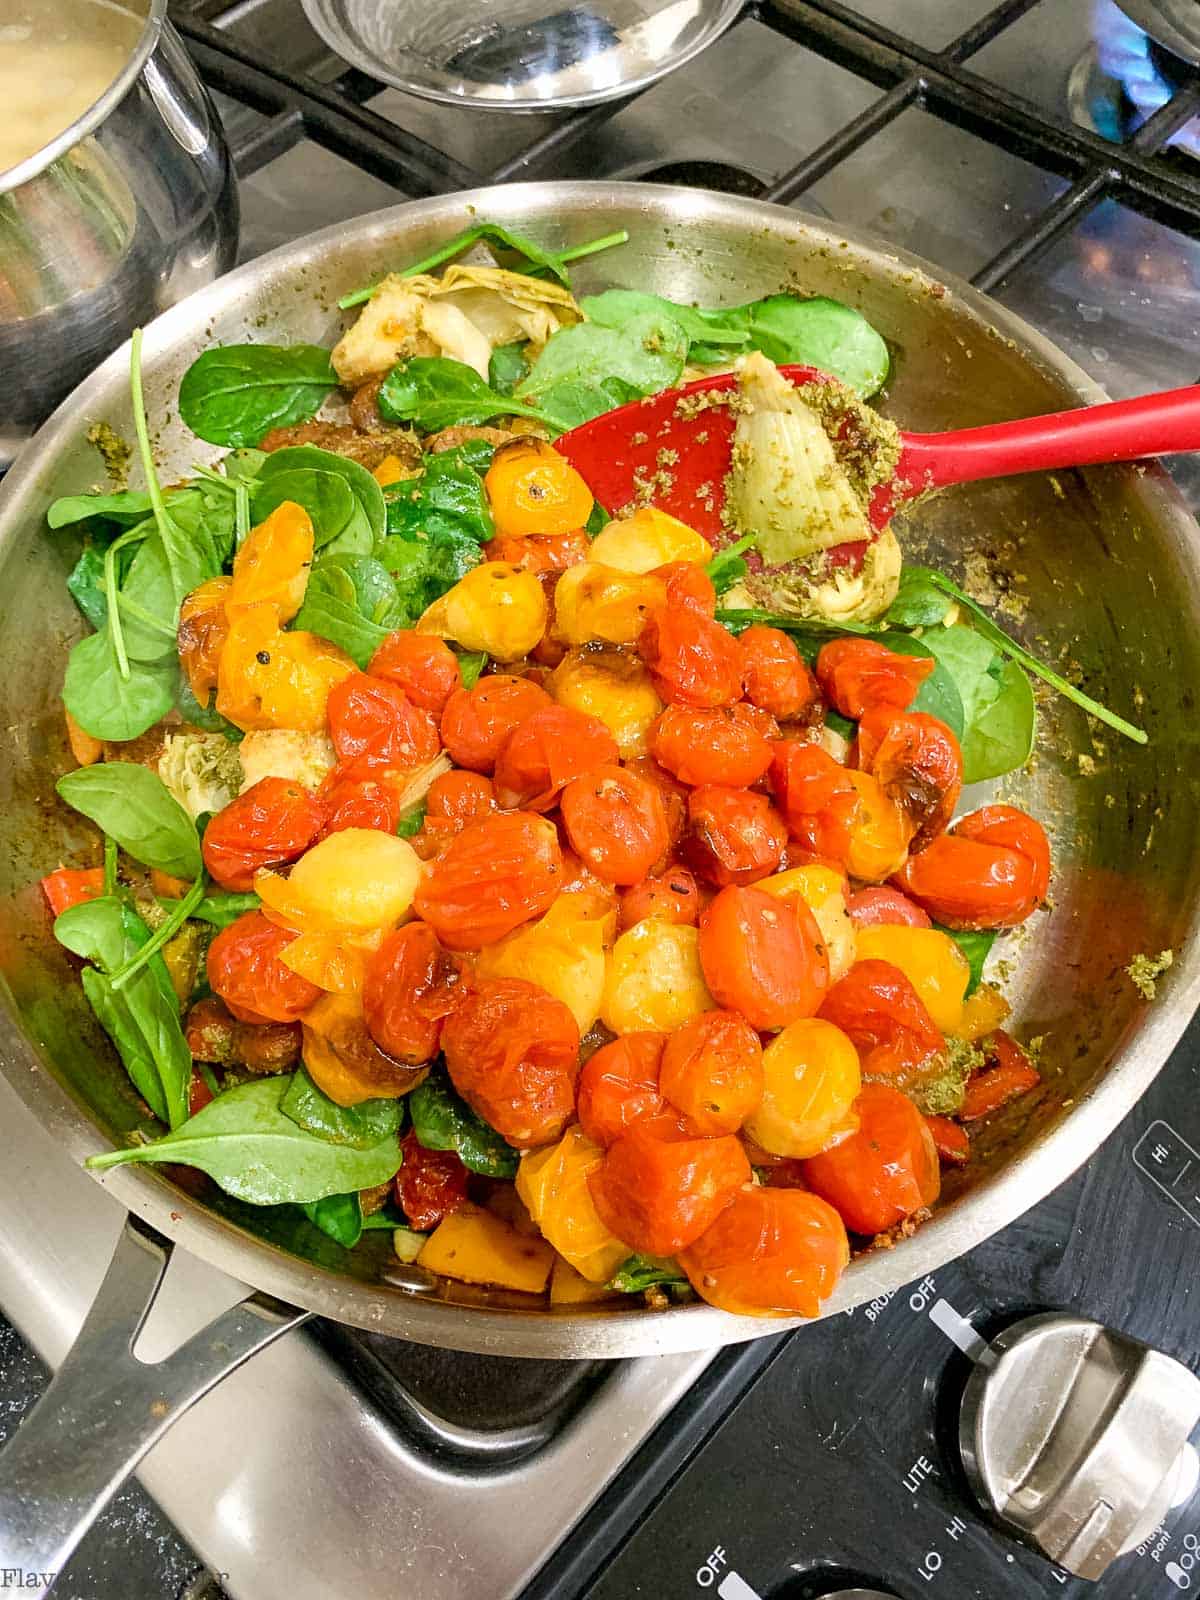 Pesto, spinach and roasted tomatoes in a skillet.